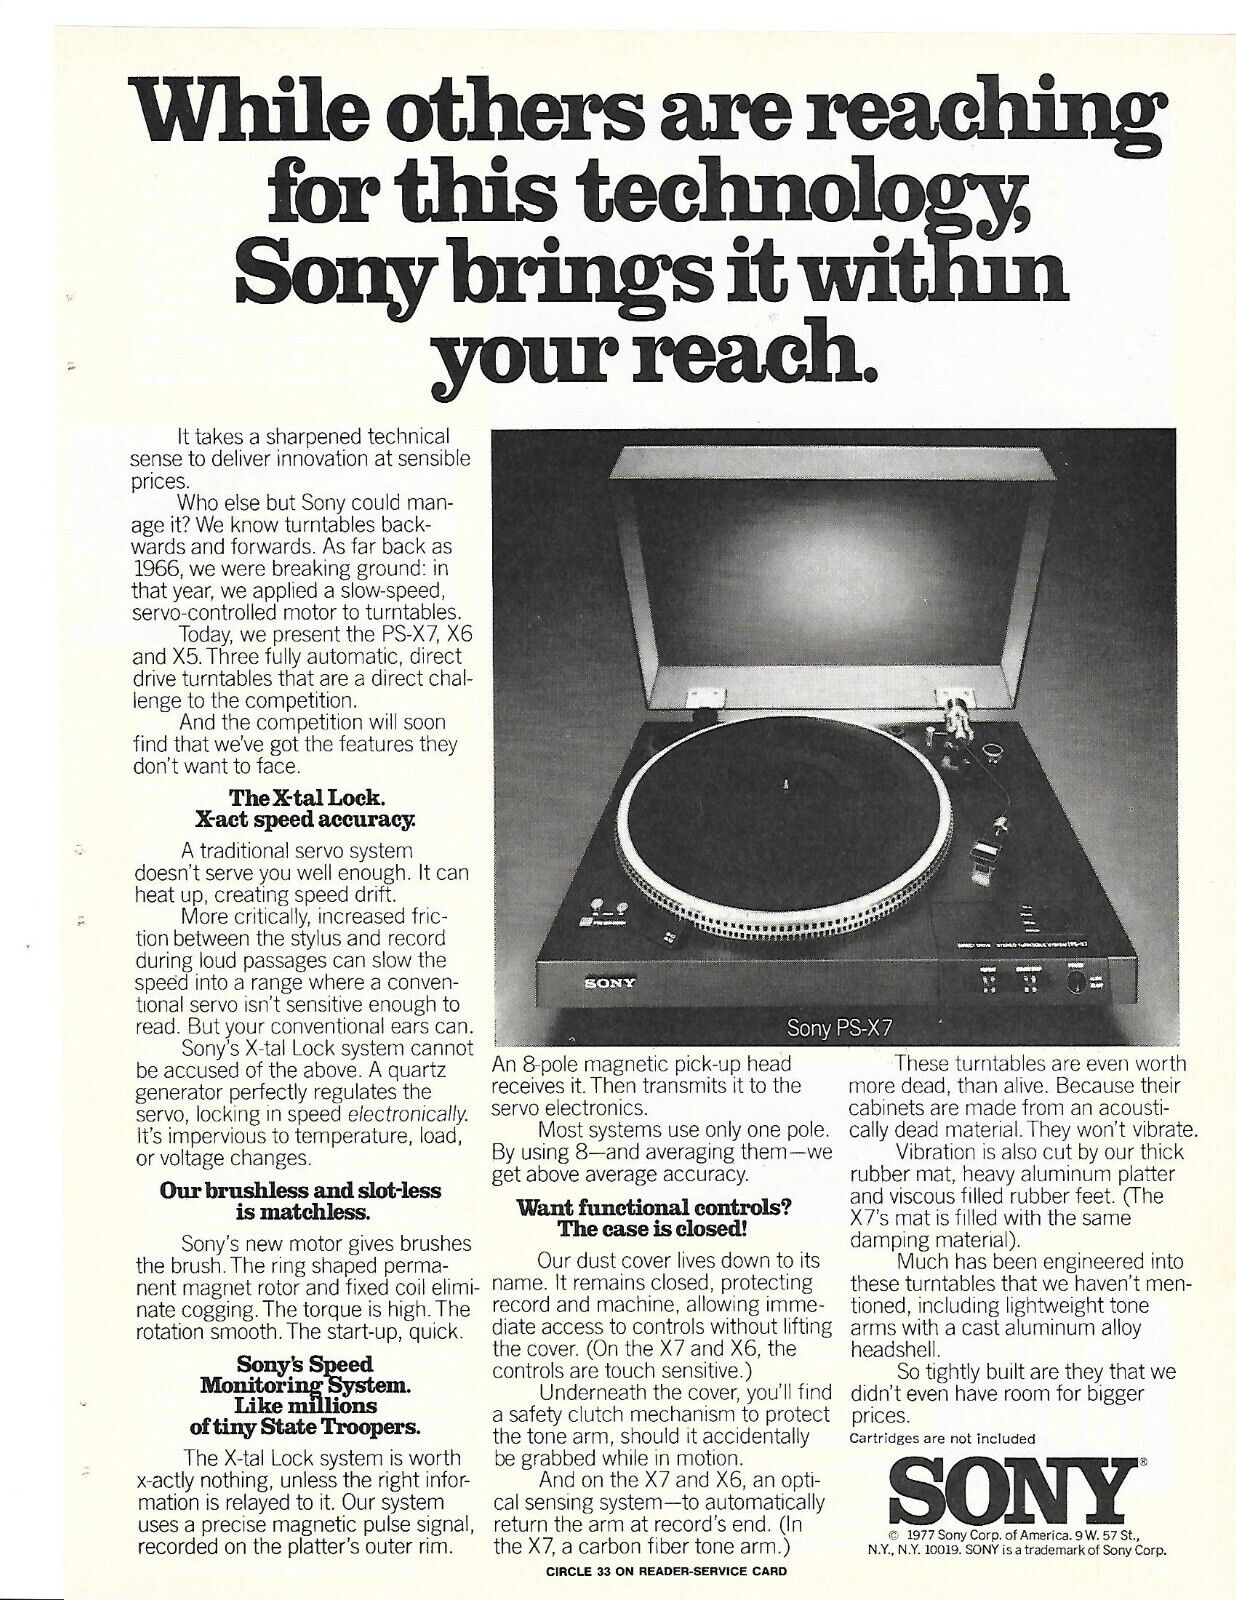 Vintage Sony PS-X7 Turntable ad, B&W / 1 Page, 05/1978